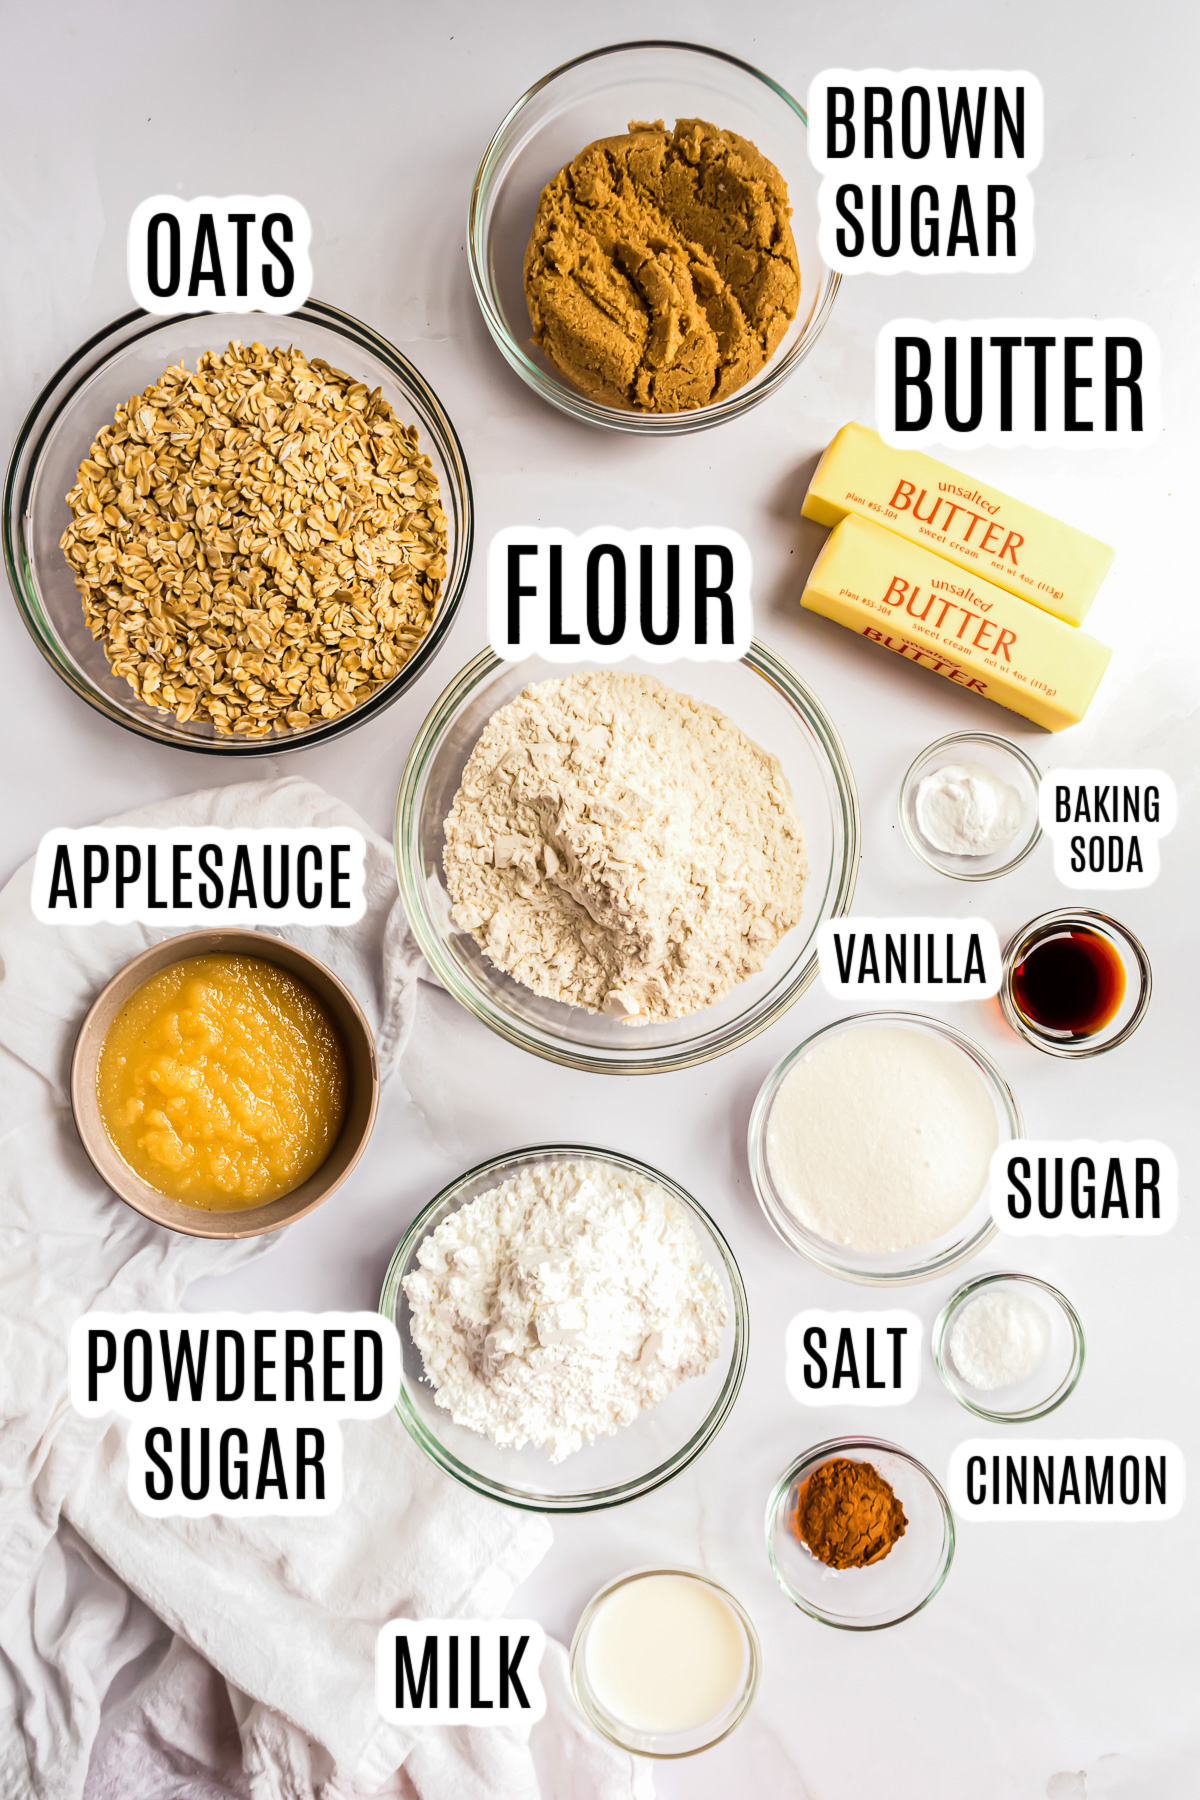 All the ingredients needed to make the oatmeal cookies without egg including: brown sugar, butter, oats, flour, applesauce, baking soda, vanilla, granulated sugar cinnamon, milk, and powdered sugar.